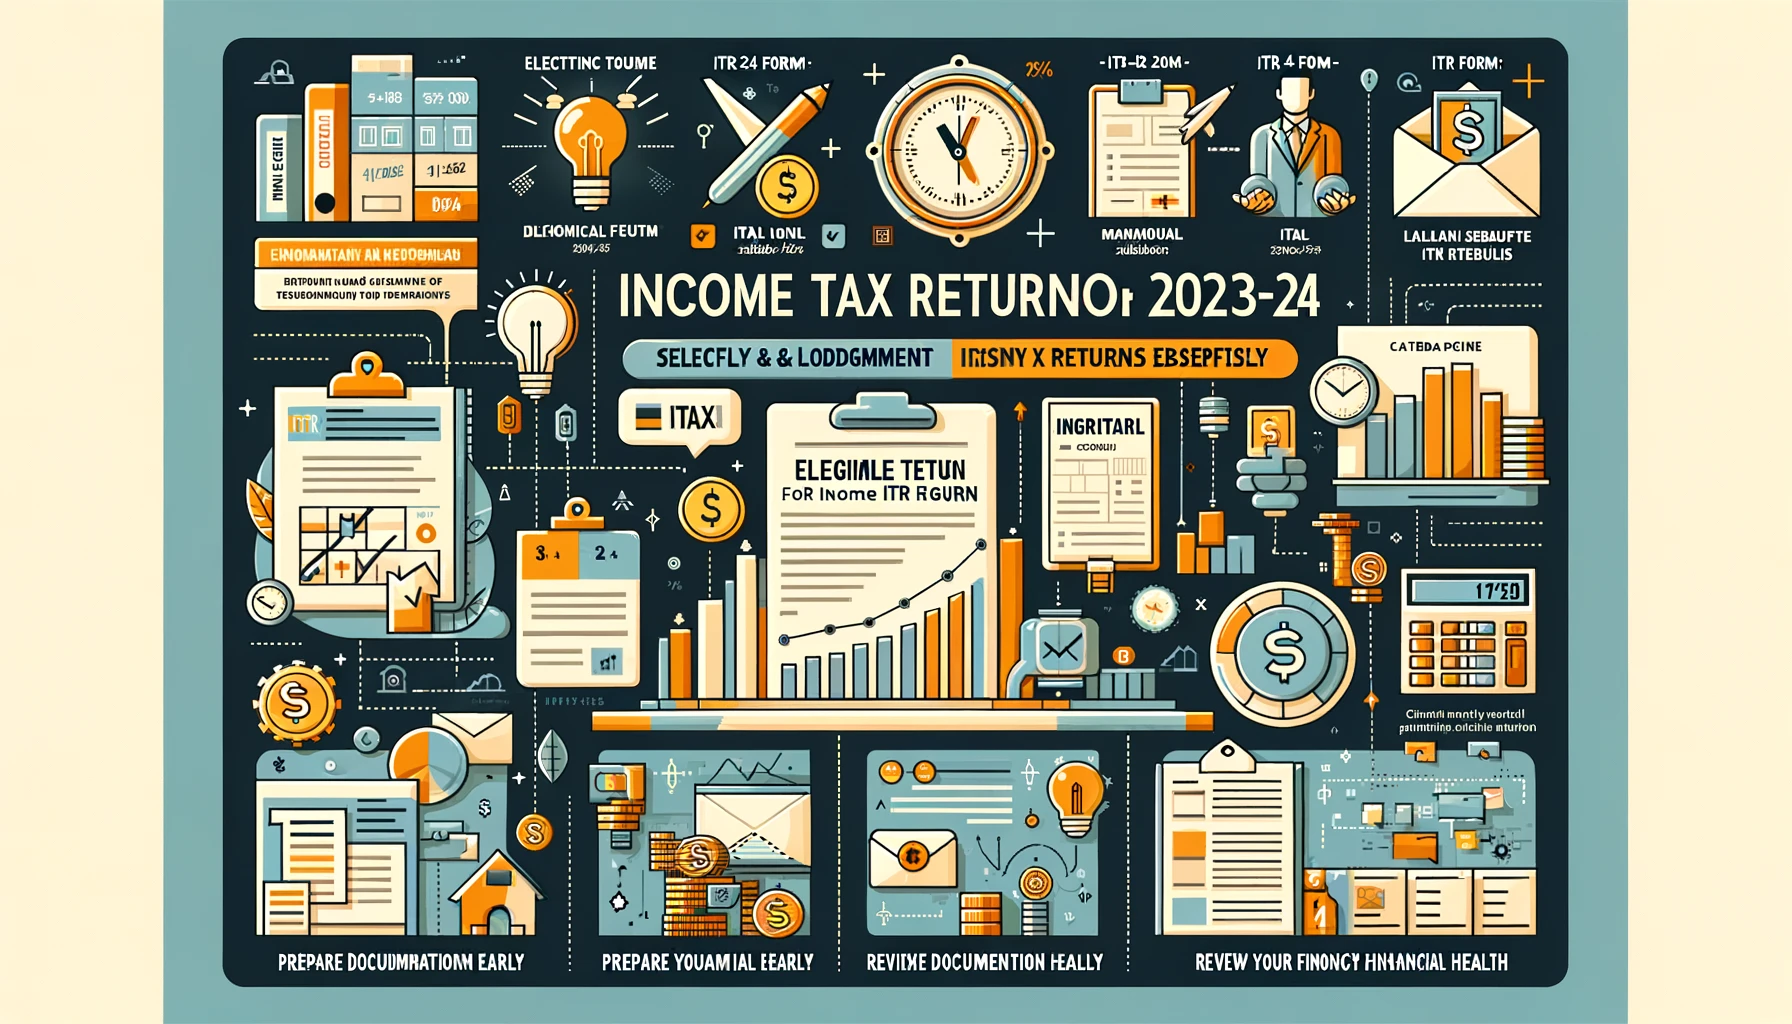 Expert Guide to Simplifying Tax Filing for 2023-24